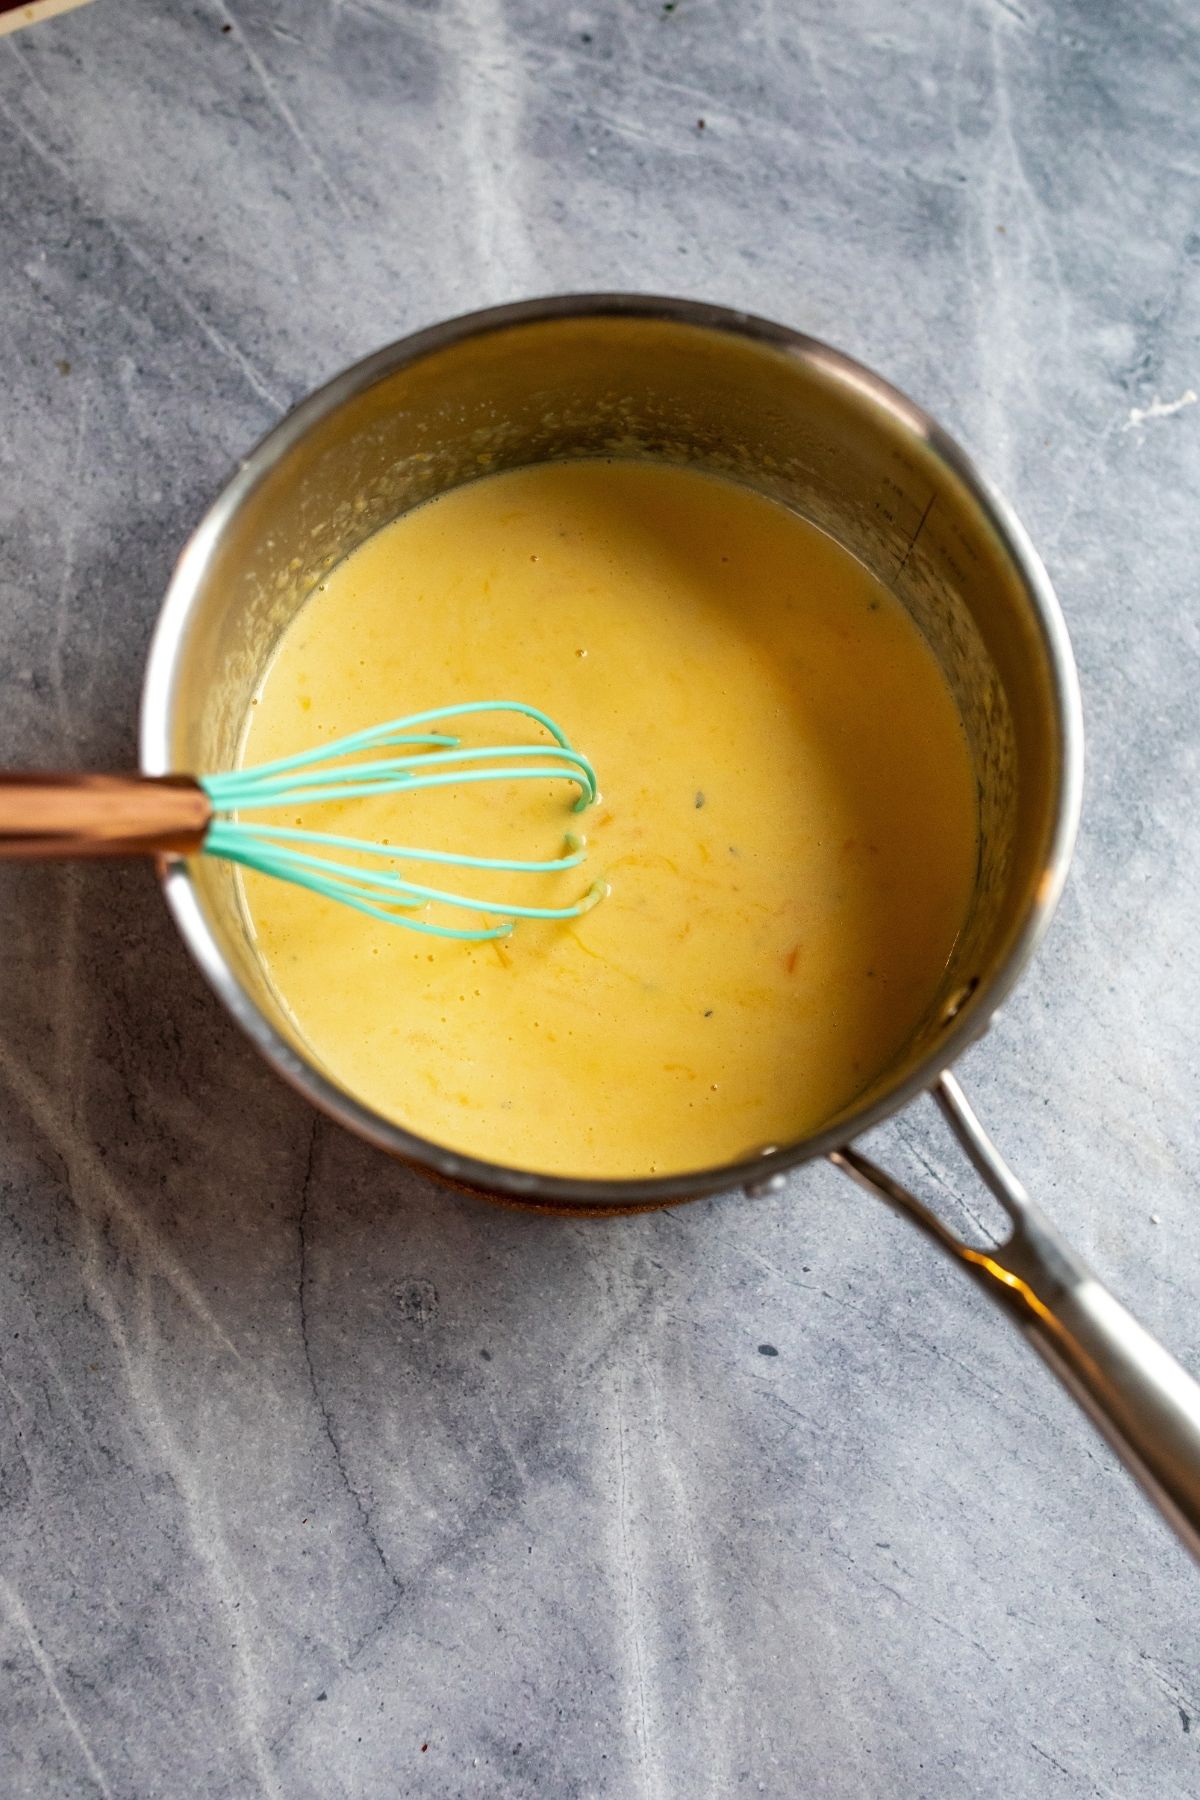 Stainless Steel pot with melted cheese sauce in it and whisk. 